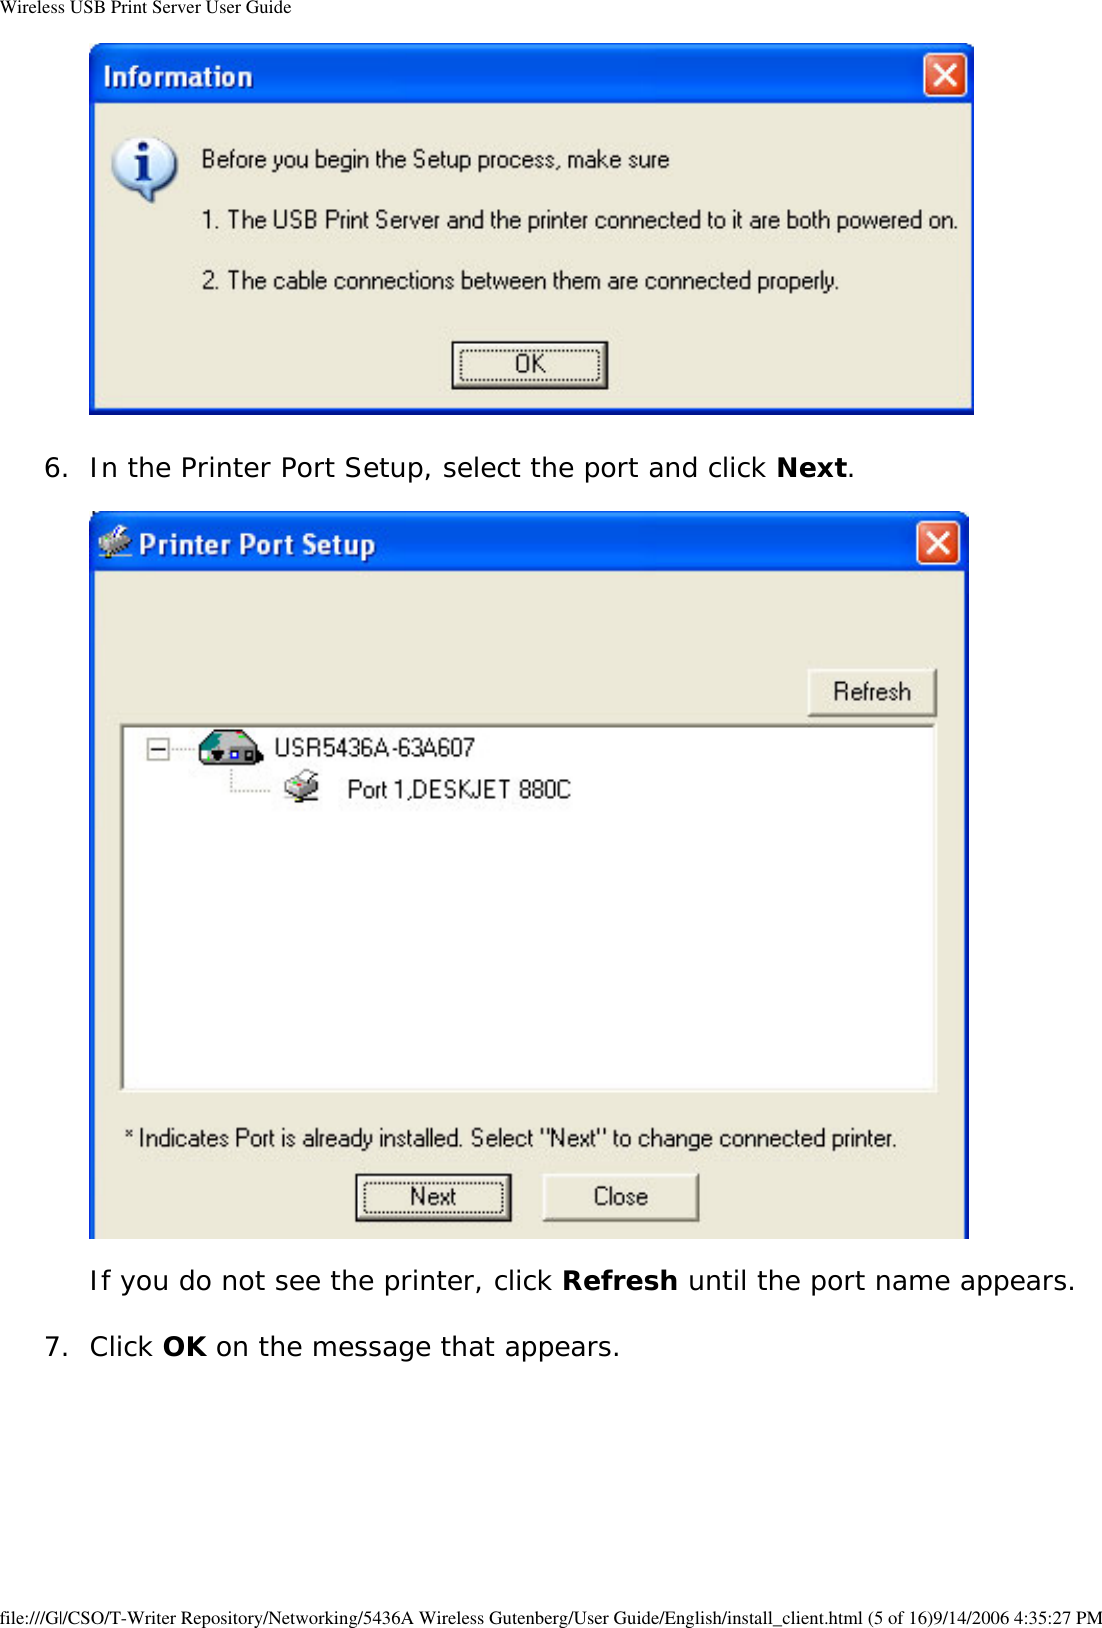 Wireless USB Print Server User Guide 6.  In the Printer Port Setup, select the port and click Next.     If you do not see the printer, click Refresh until the port name appears.  7.  Click OK on the message that appears.  file:///G|/CSO/T-Writer Repository/Networking/5436A Wireless Gutenberg/User Guide/English/install_client.html (5 of 16)9/14/2006 4:35:27 PM